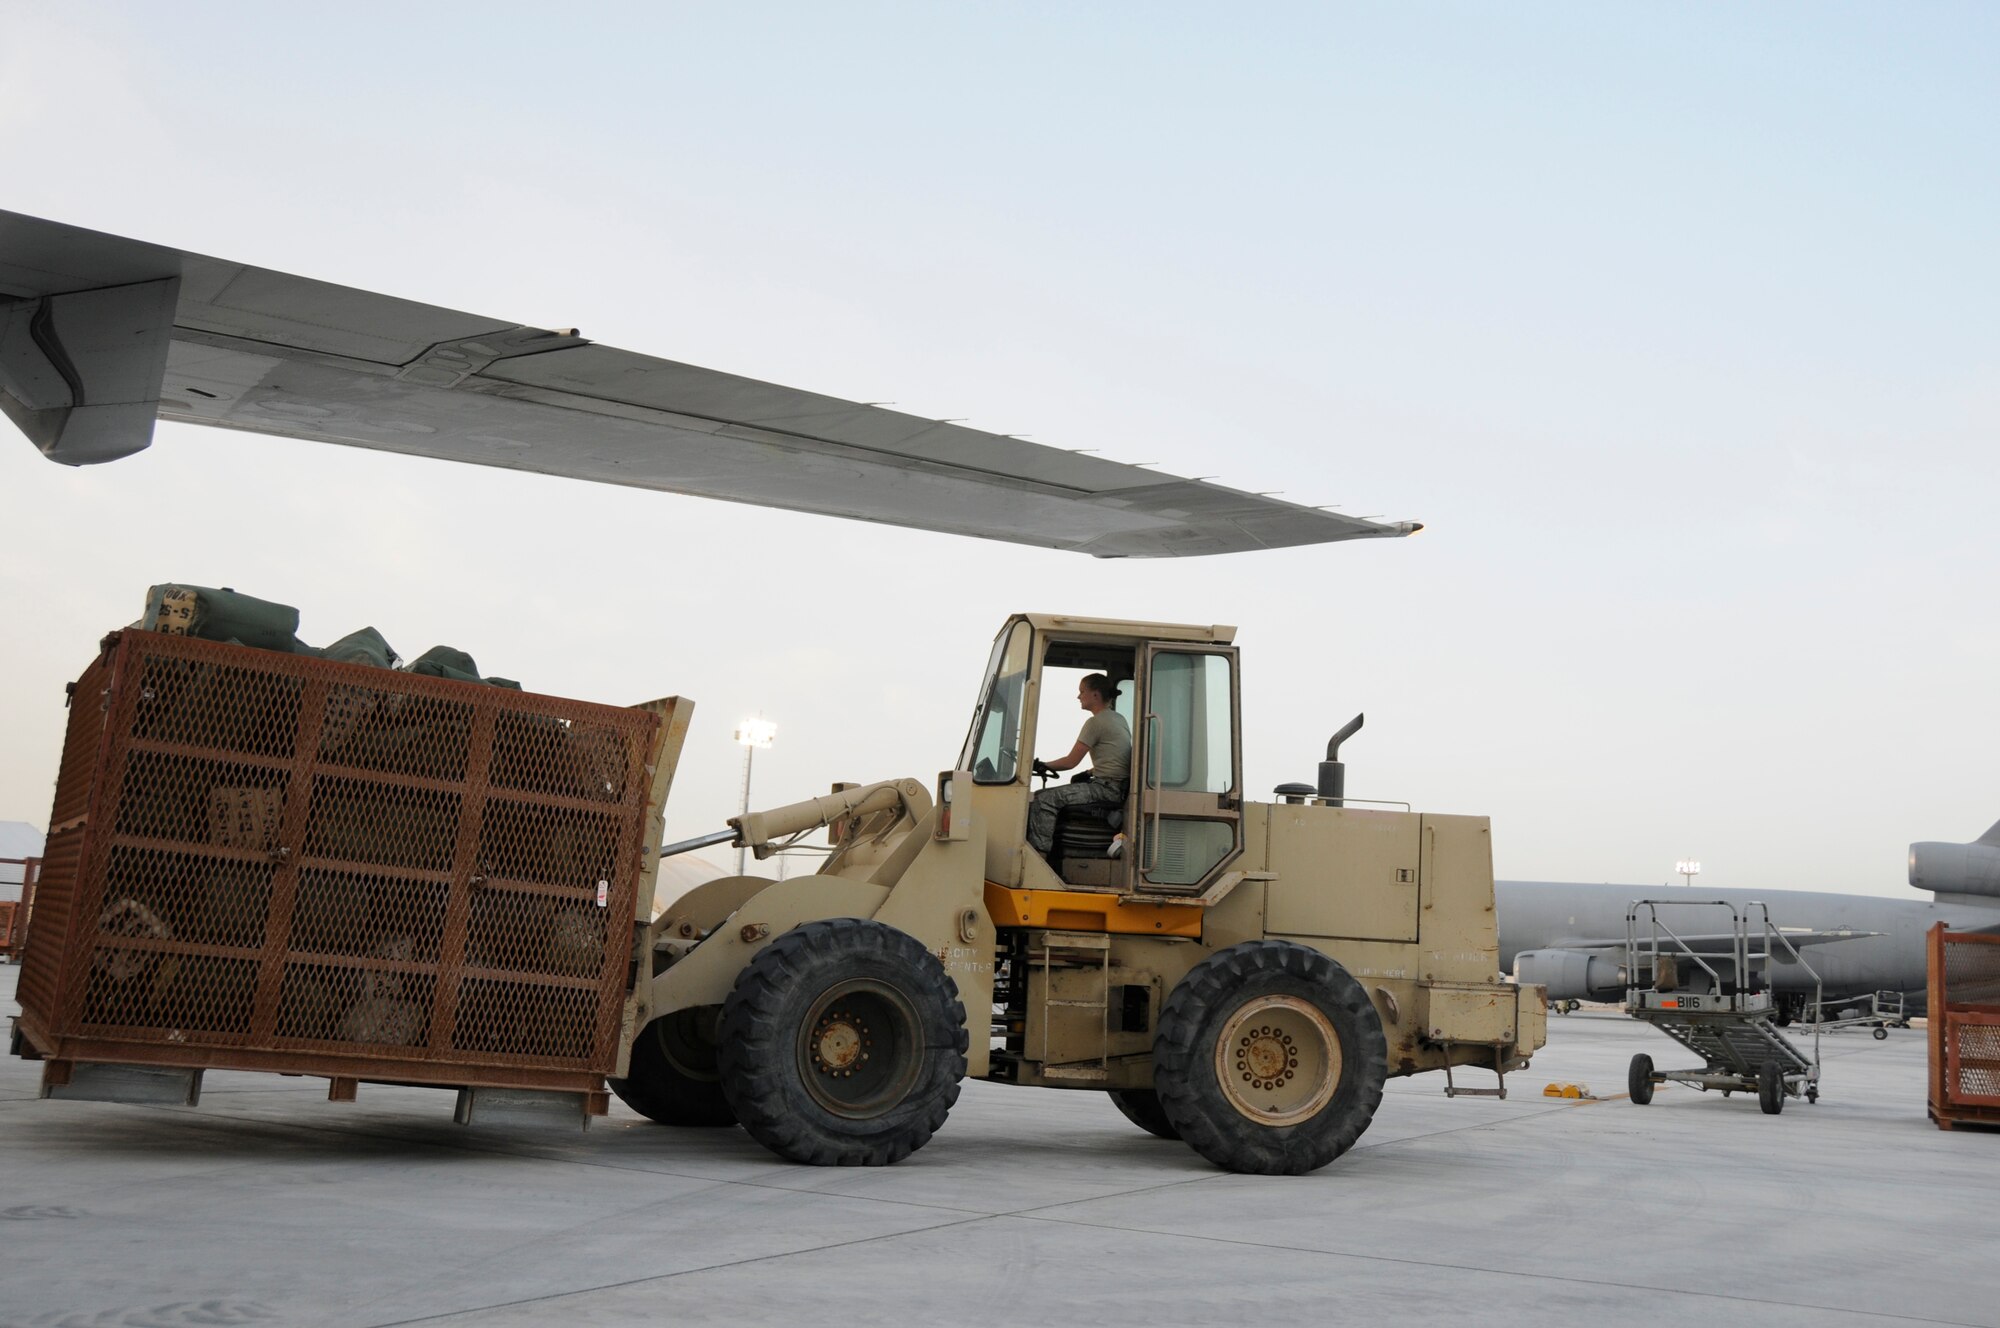 SOUTHWEST ASIA - Duffle bags and luggage belonging to the 5-52 Air Defense Artillery Battalion is off-loaded from a DC-10 commercial airline at the 380th Air Expeditionary Wing, Mar 5. 200 Soldiers and several C-5 Galaxy's loaded with vehicles and equipment landed throughout the last few days as part of the first Patriot Battery mission for the wing, improving air defense capability. The Army will be incorporated into the 380th AEW's mission in support of Operations Iraqi and Enduring Freedom and Joint Task Force Horn of Africa. The 5-52 Air Defense Artillery Battalion is deployed out of Fort Bliss, TX. (U.S. Air Force photo by Senior Airman Brian J. Ellis)